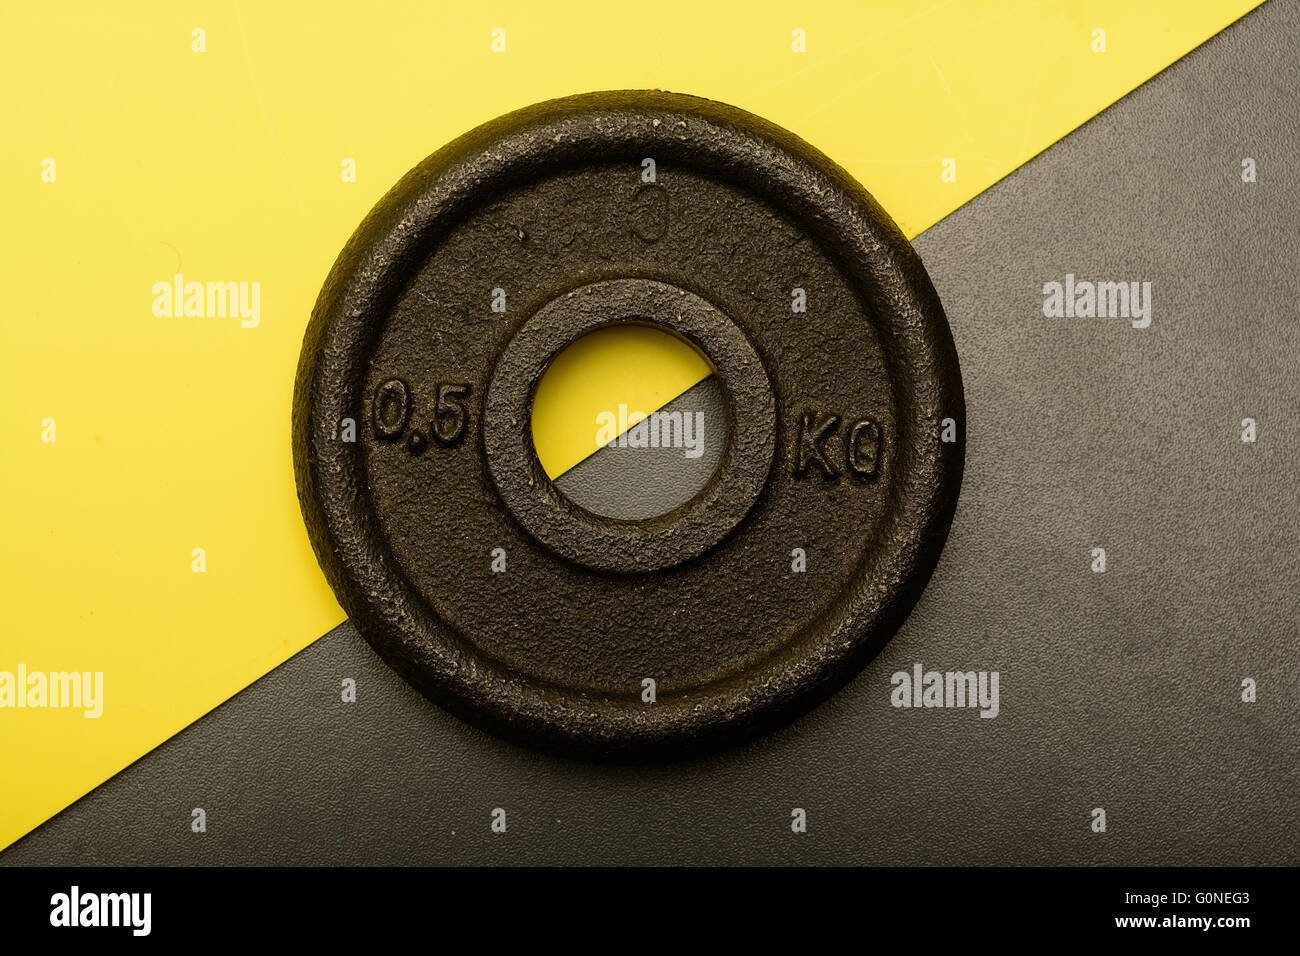 metal weight lifting disc on abstract background Stock Photo